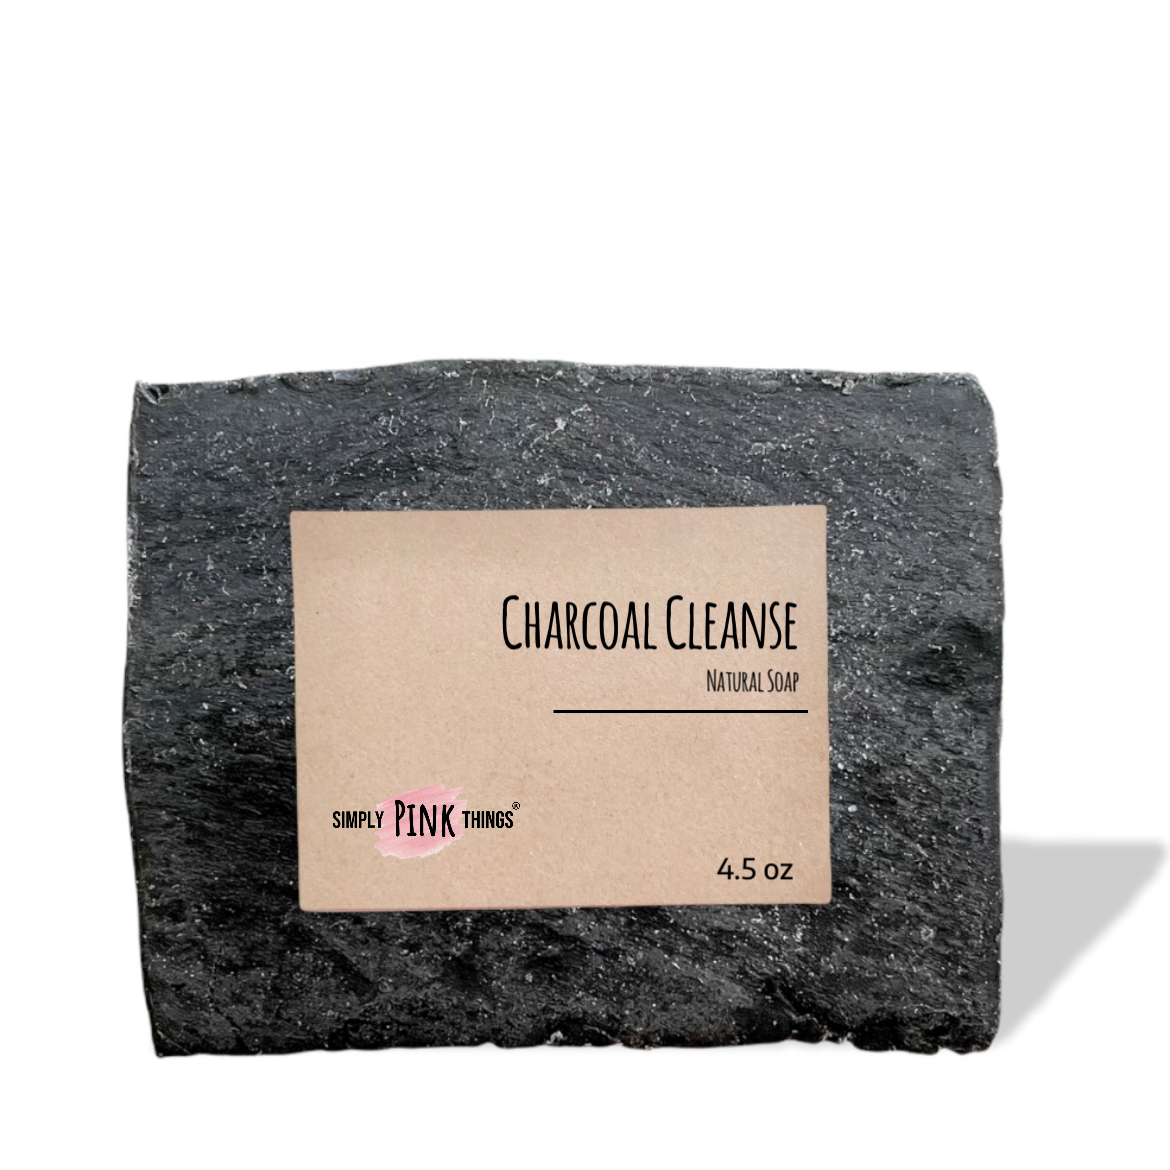 Charcoal Cleanse Natural Soap (4.5 oz.)